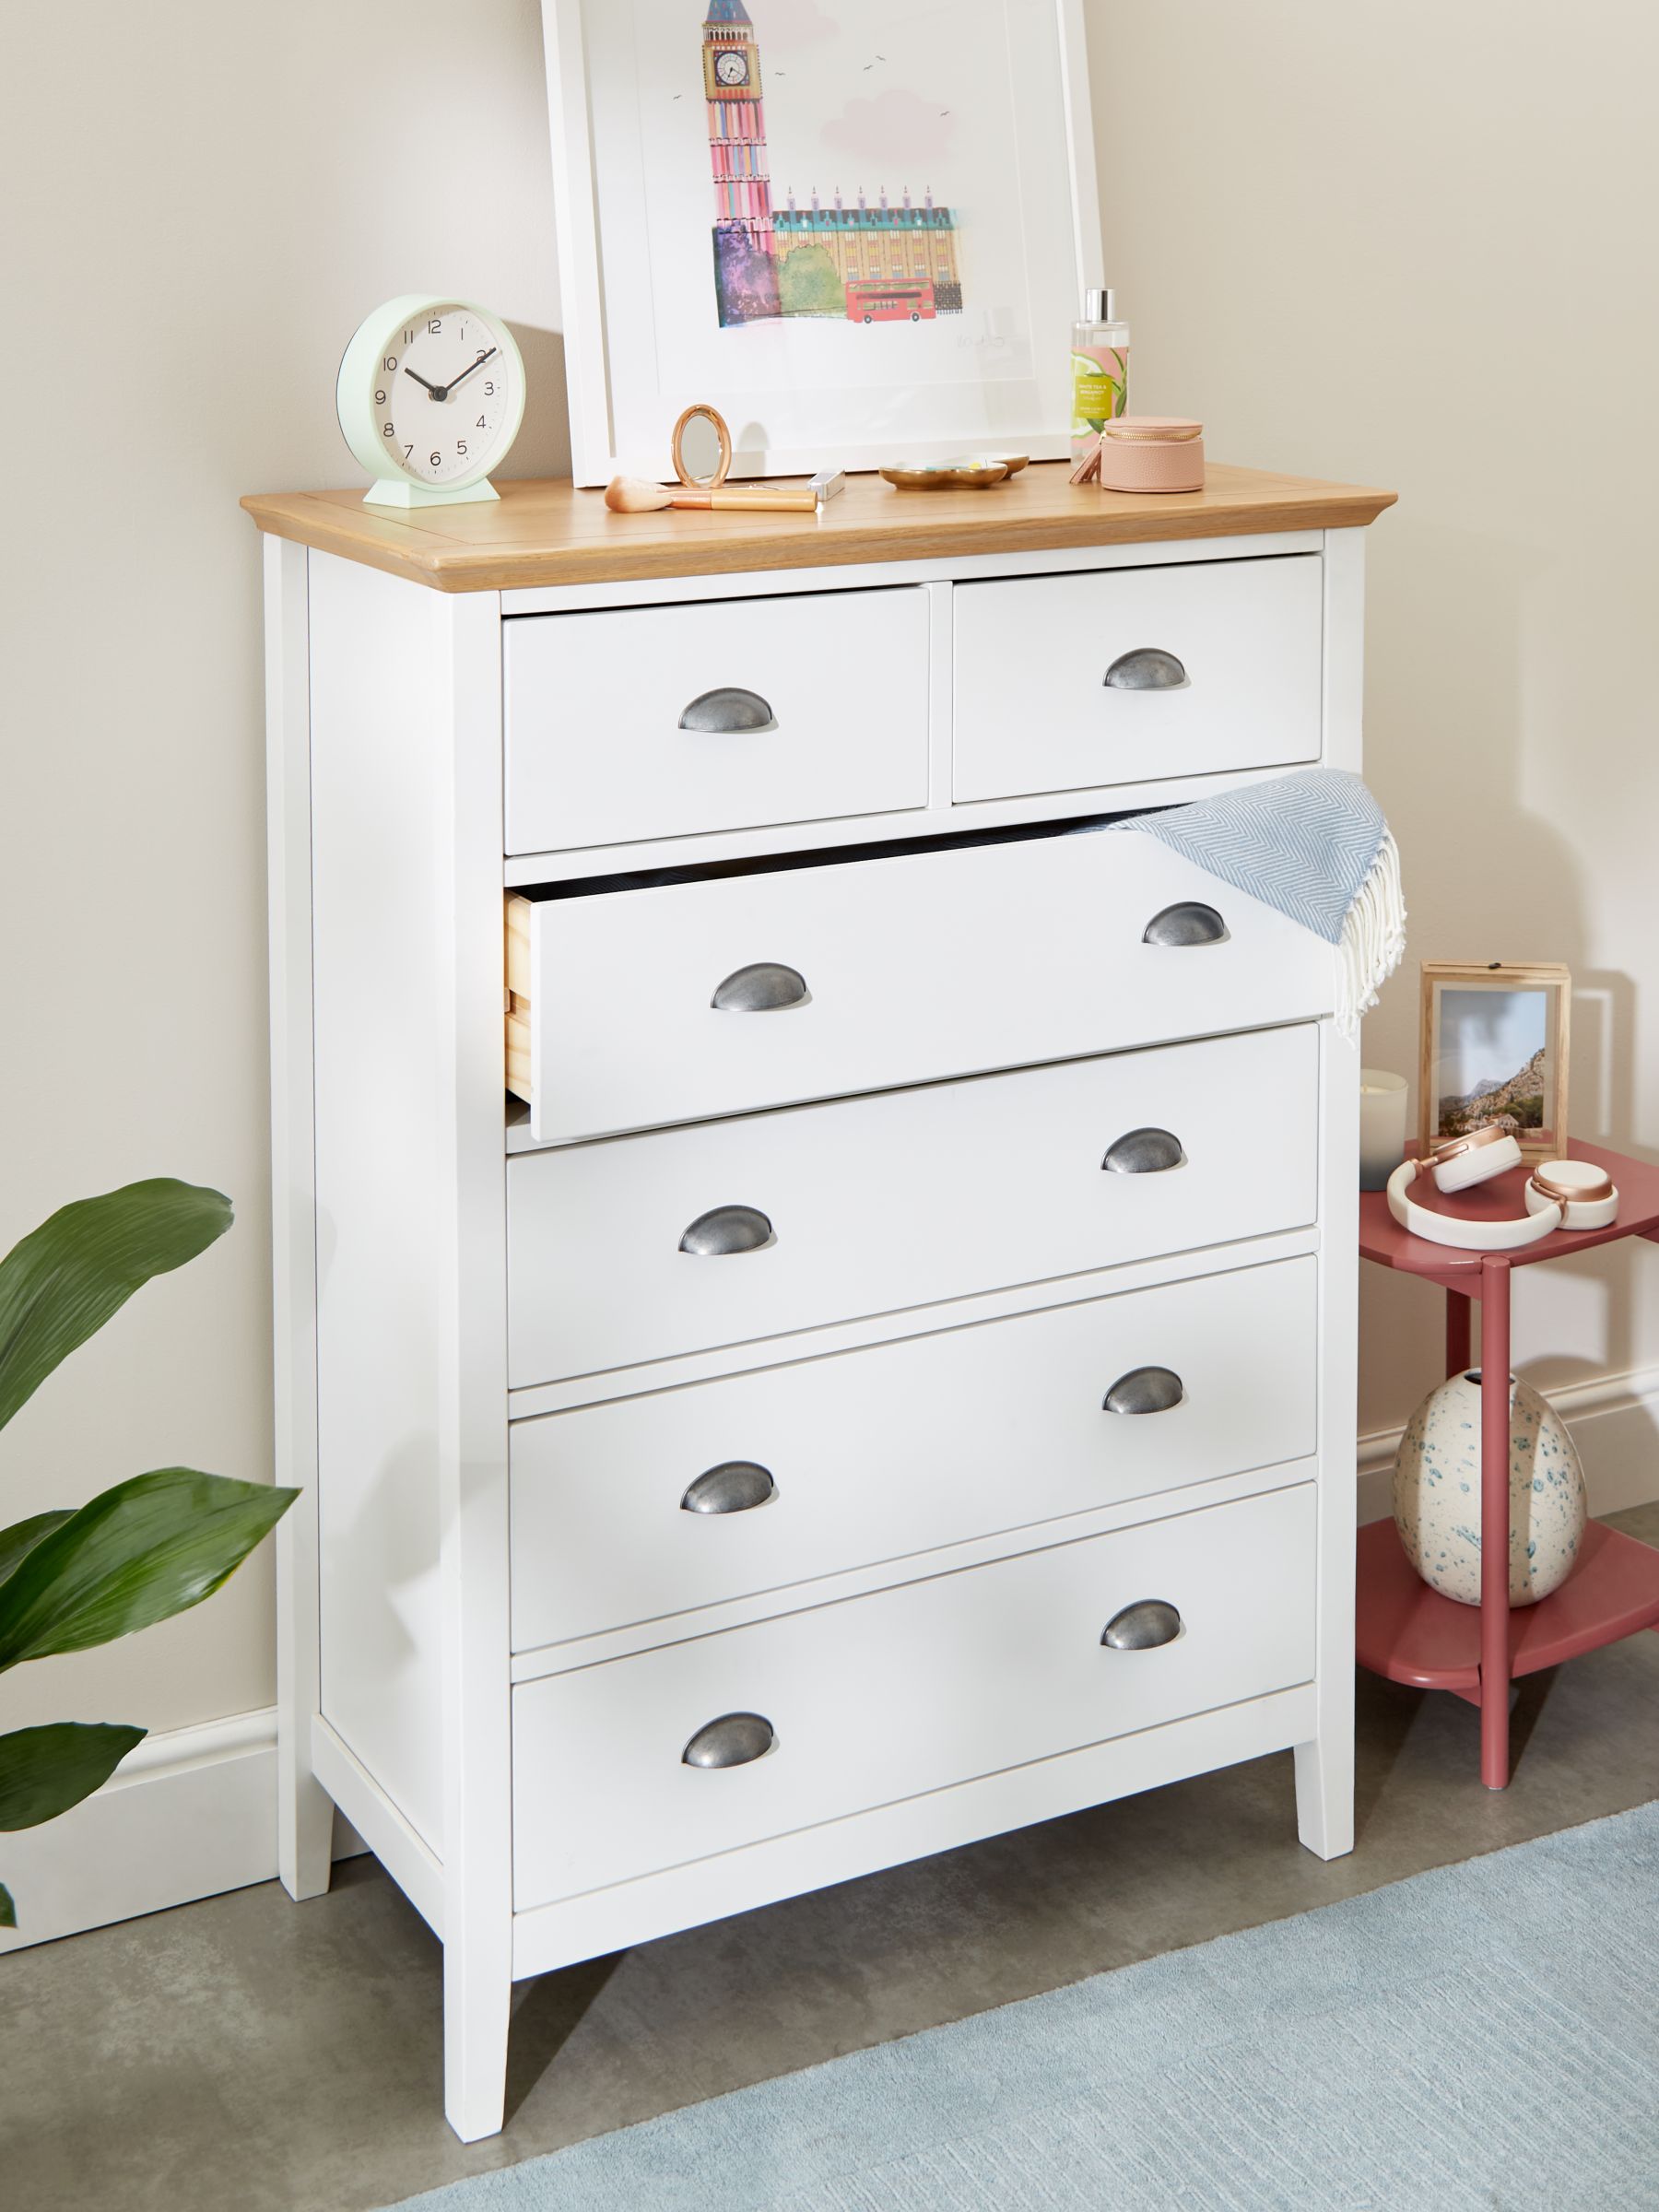 John Lewis ANYDAY Albany 6 Drawer Chest